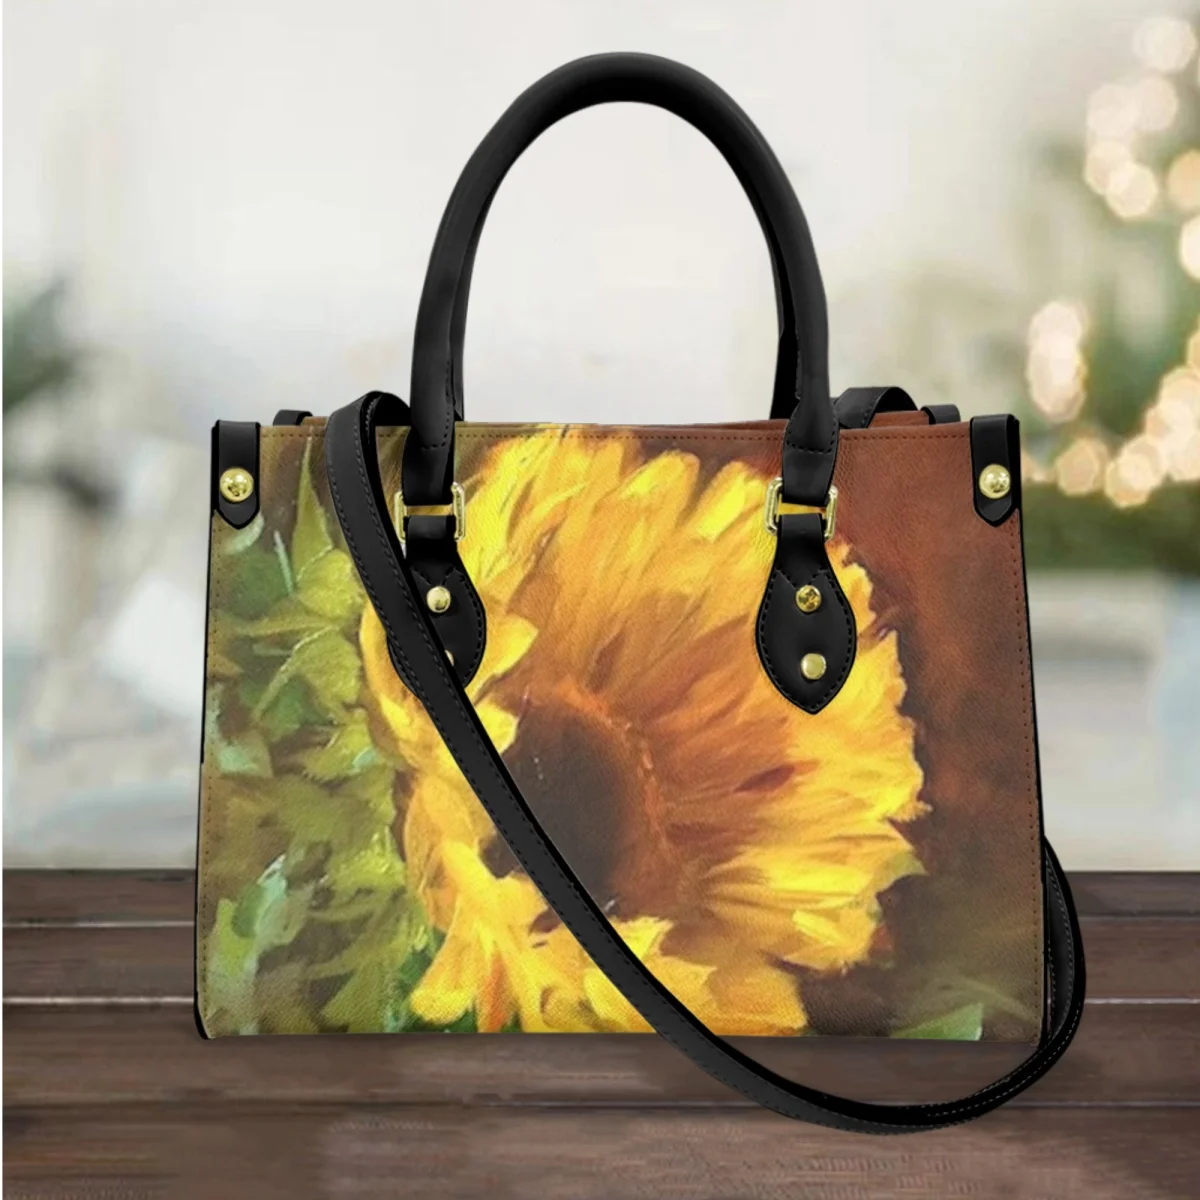 

FORUDESIGNS Women Handbags Floral Sunflower Oil Painting Female Shoulder Bags Vintage Fashion Leather Totes Messengers